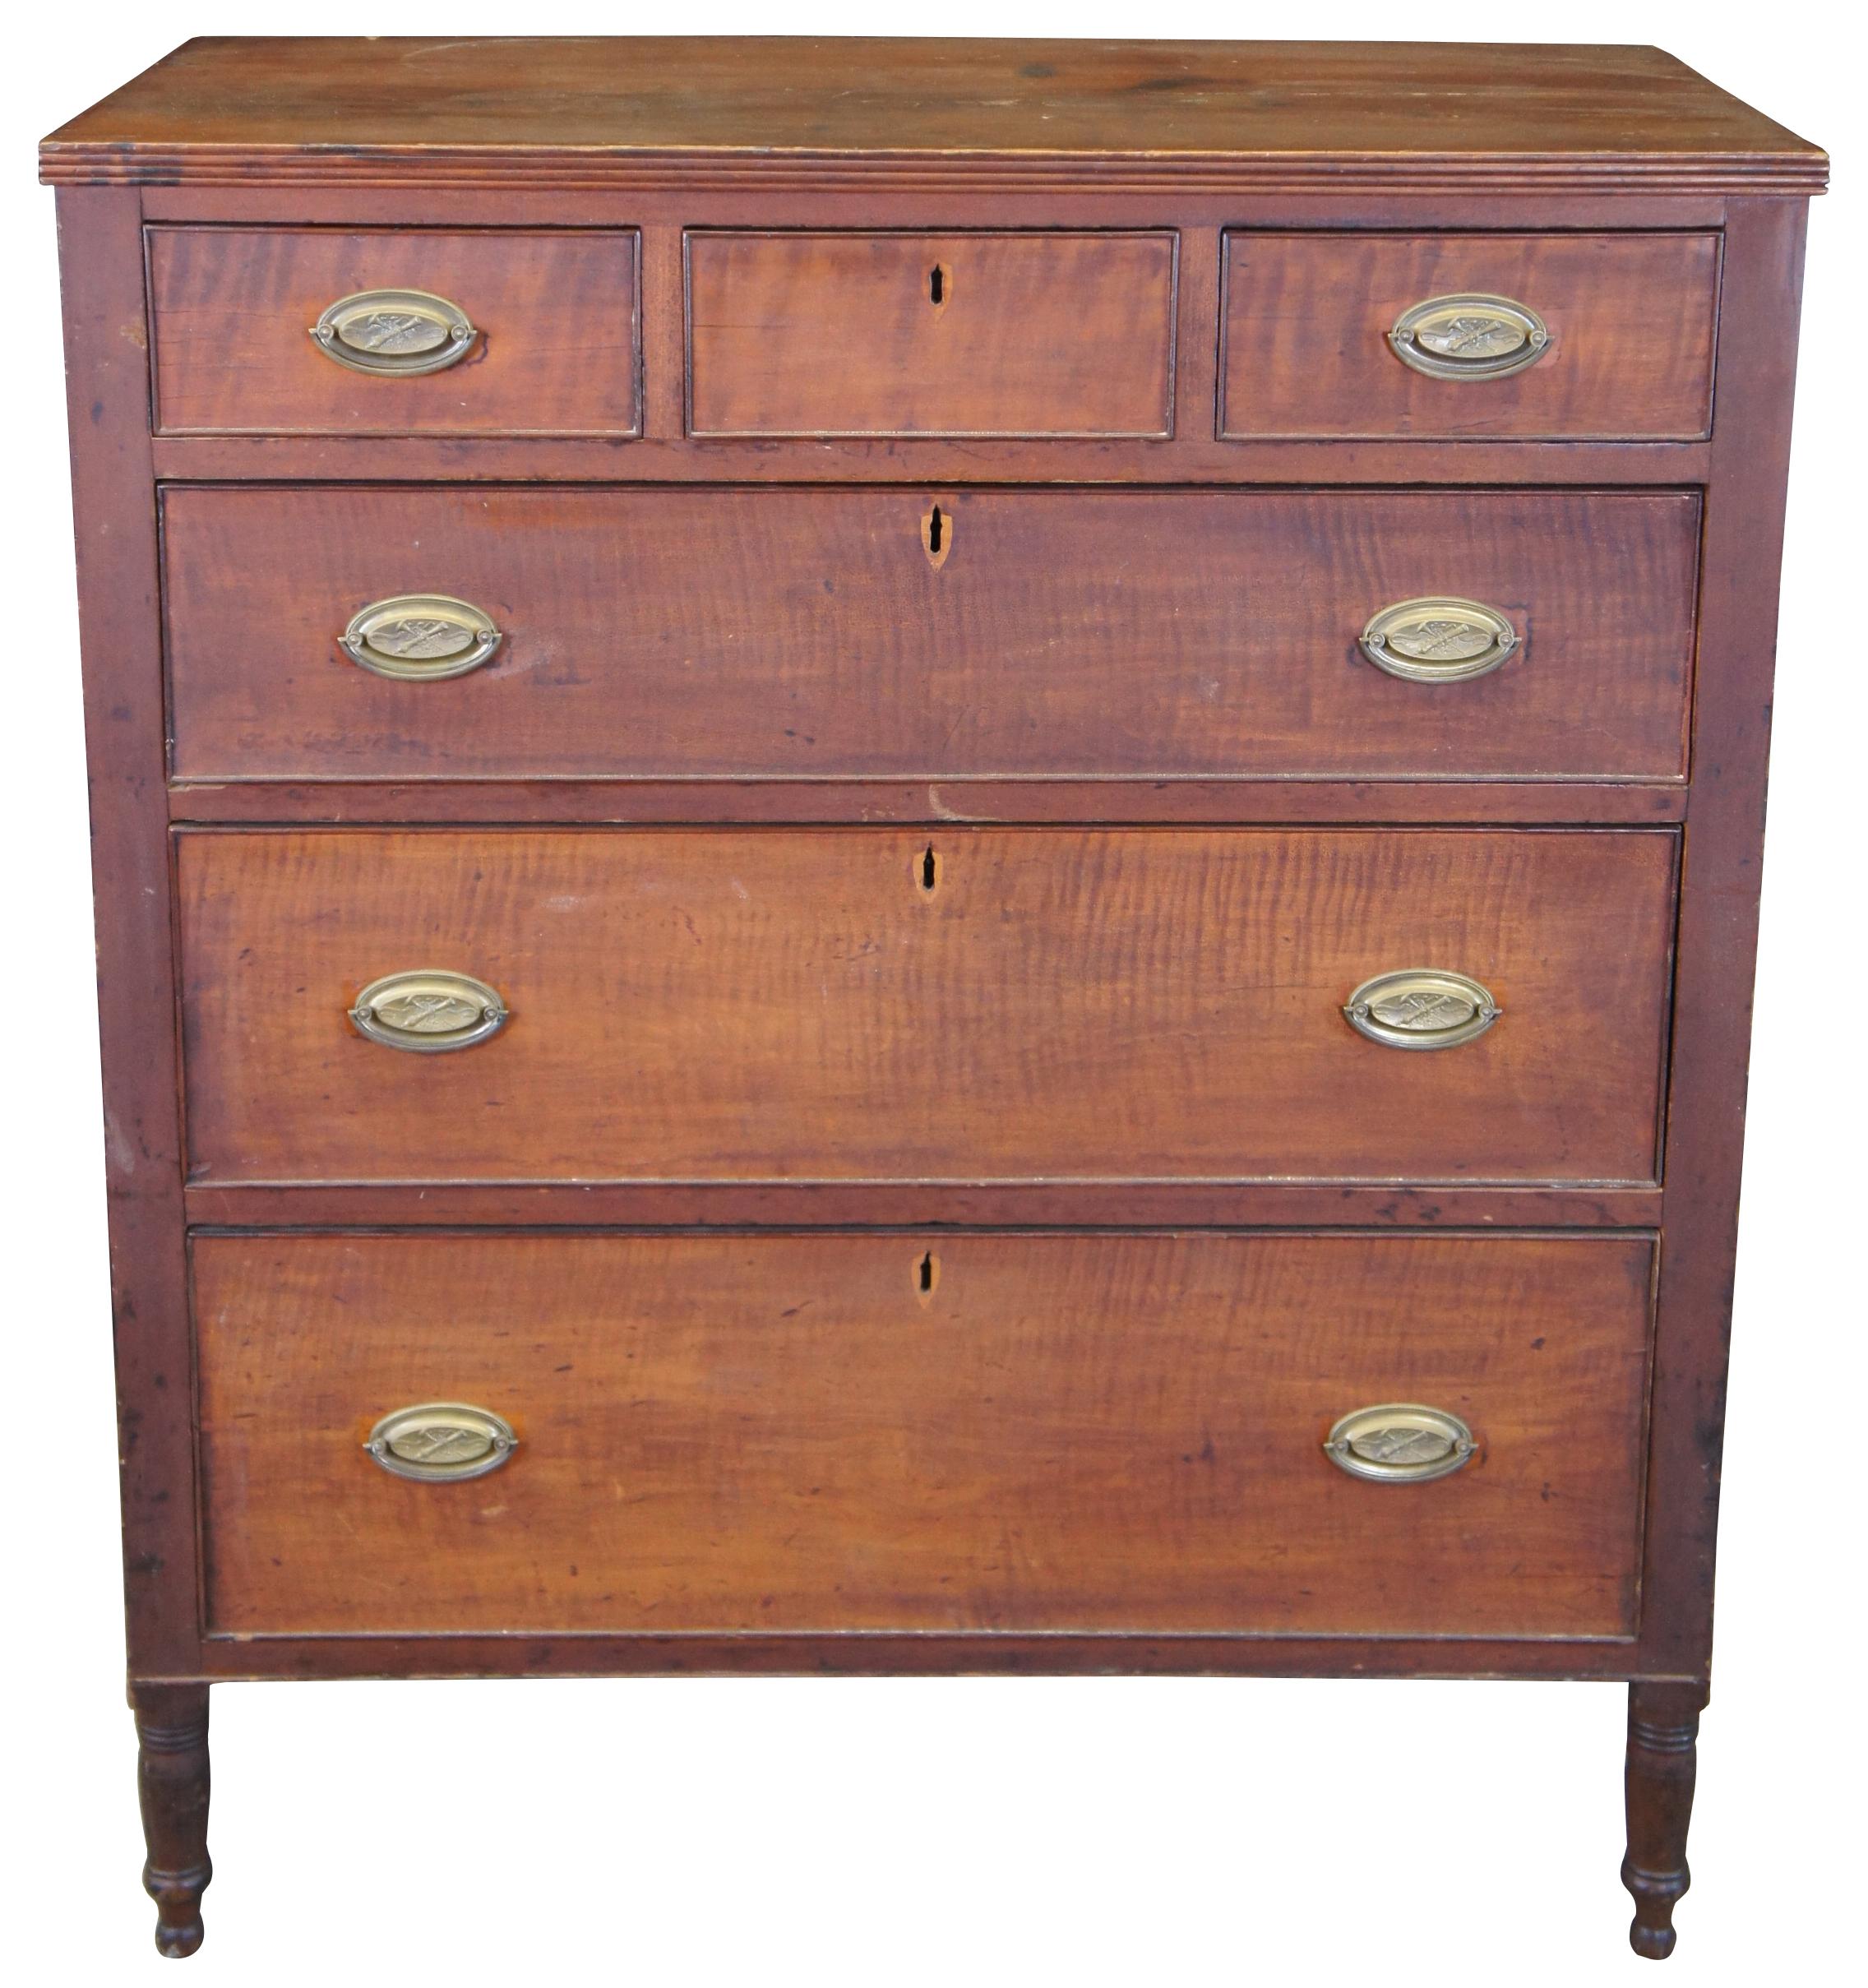 An impressive American Sheraton / Federal tallboy chest of drawers, circa first quarter 19th century. Made of flamed birch featuring four drawers with Neoclassical / Hepplewhite oval crossed cannon bail hardware with the phrase Trafalgar Copenhagen.